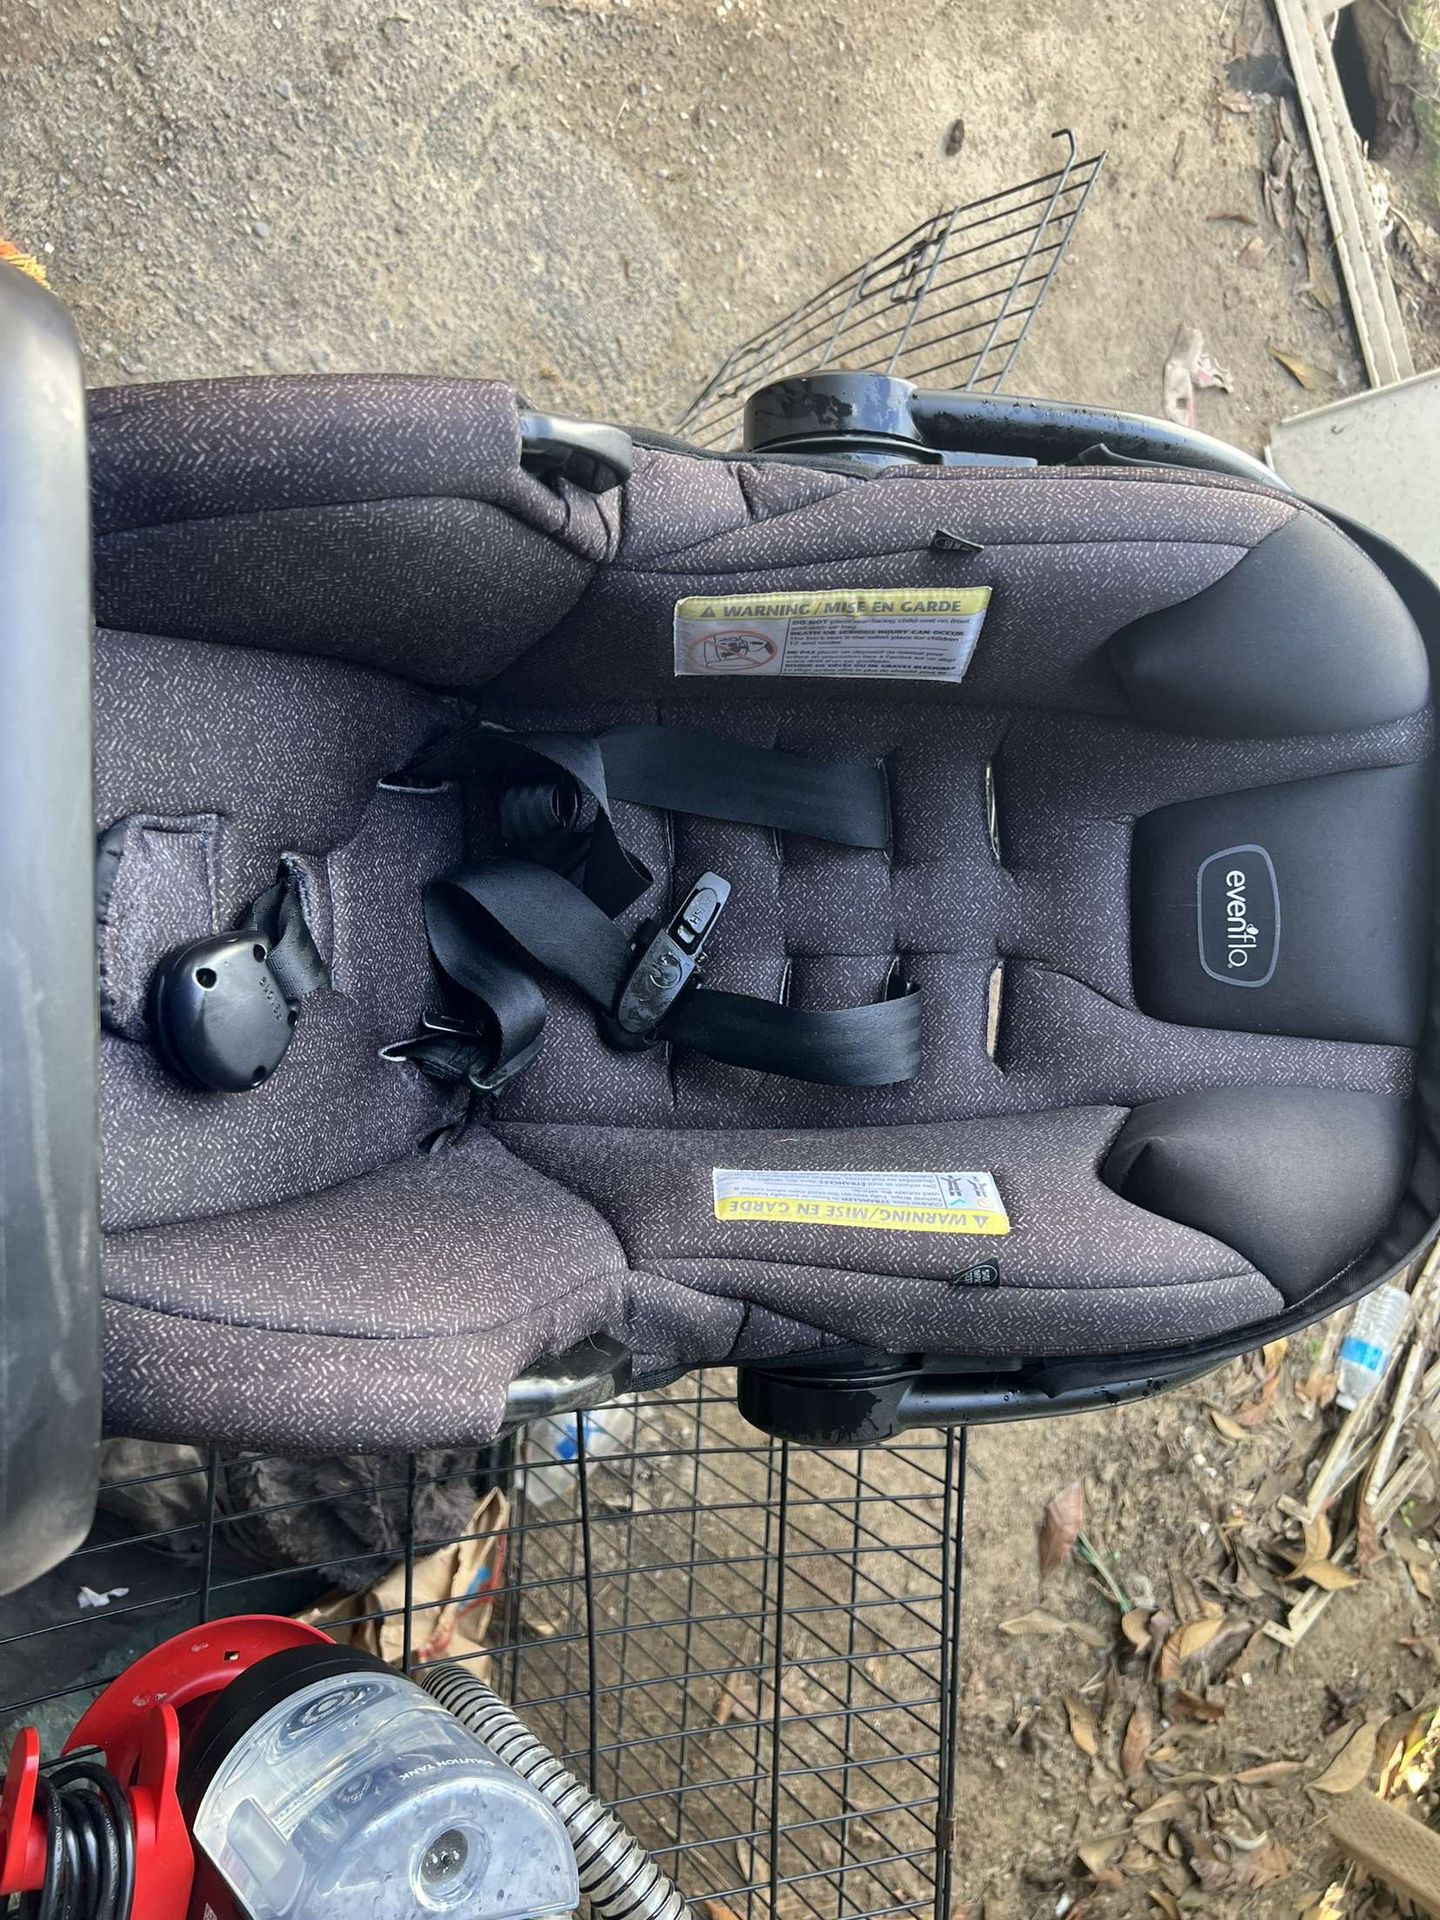 Evenflo Stroller And Car Seat 